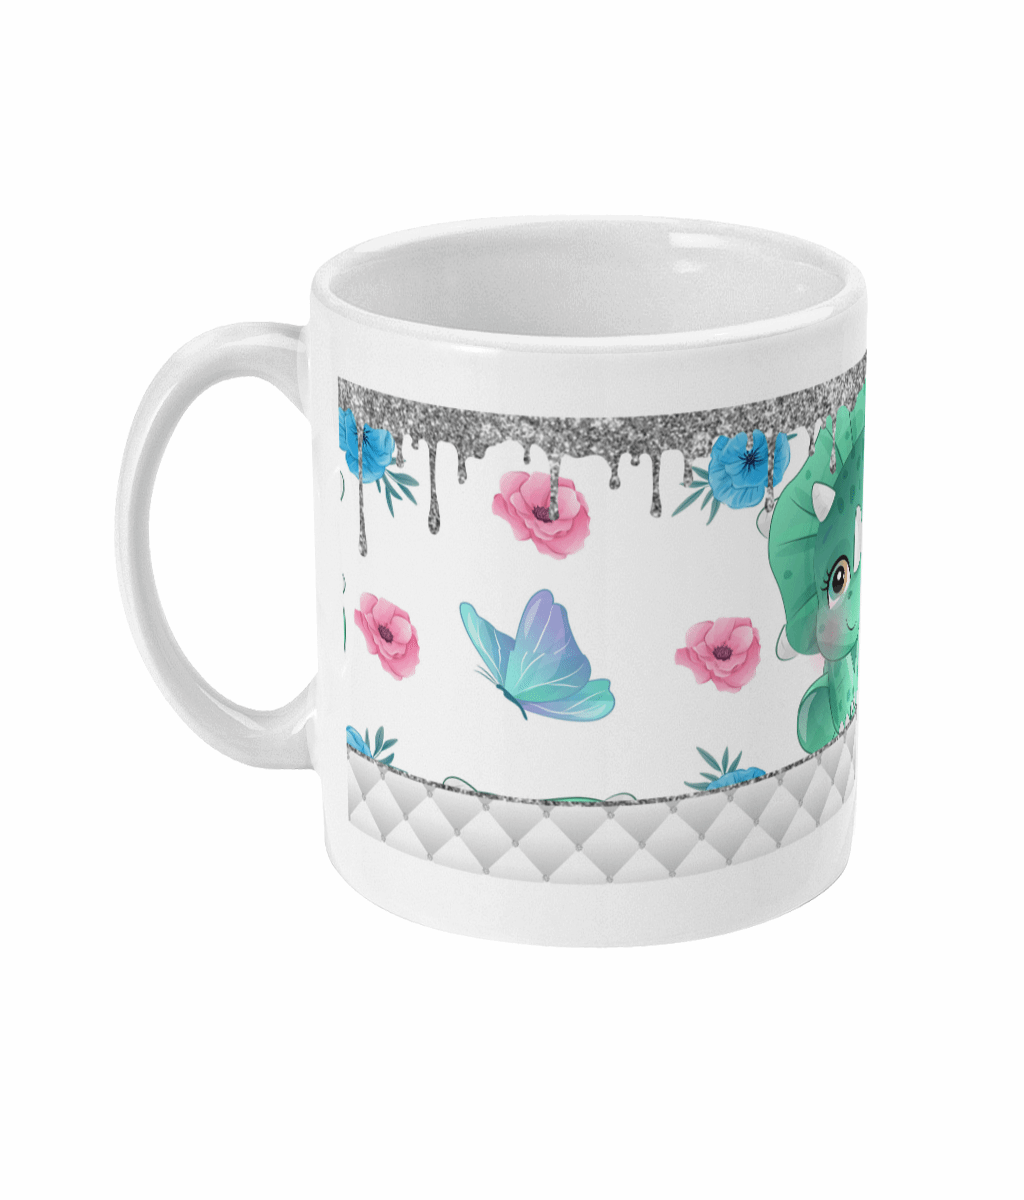  Cute Dinosaur with Flowers and Butterflies Mug by Free Spirit Accessories sold by Free Spirit Accessories